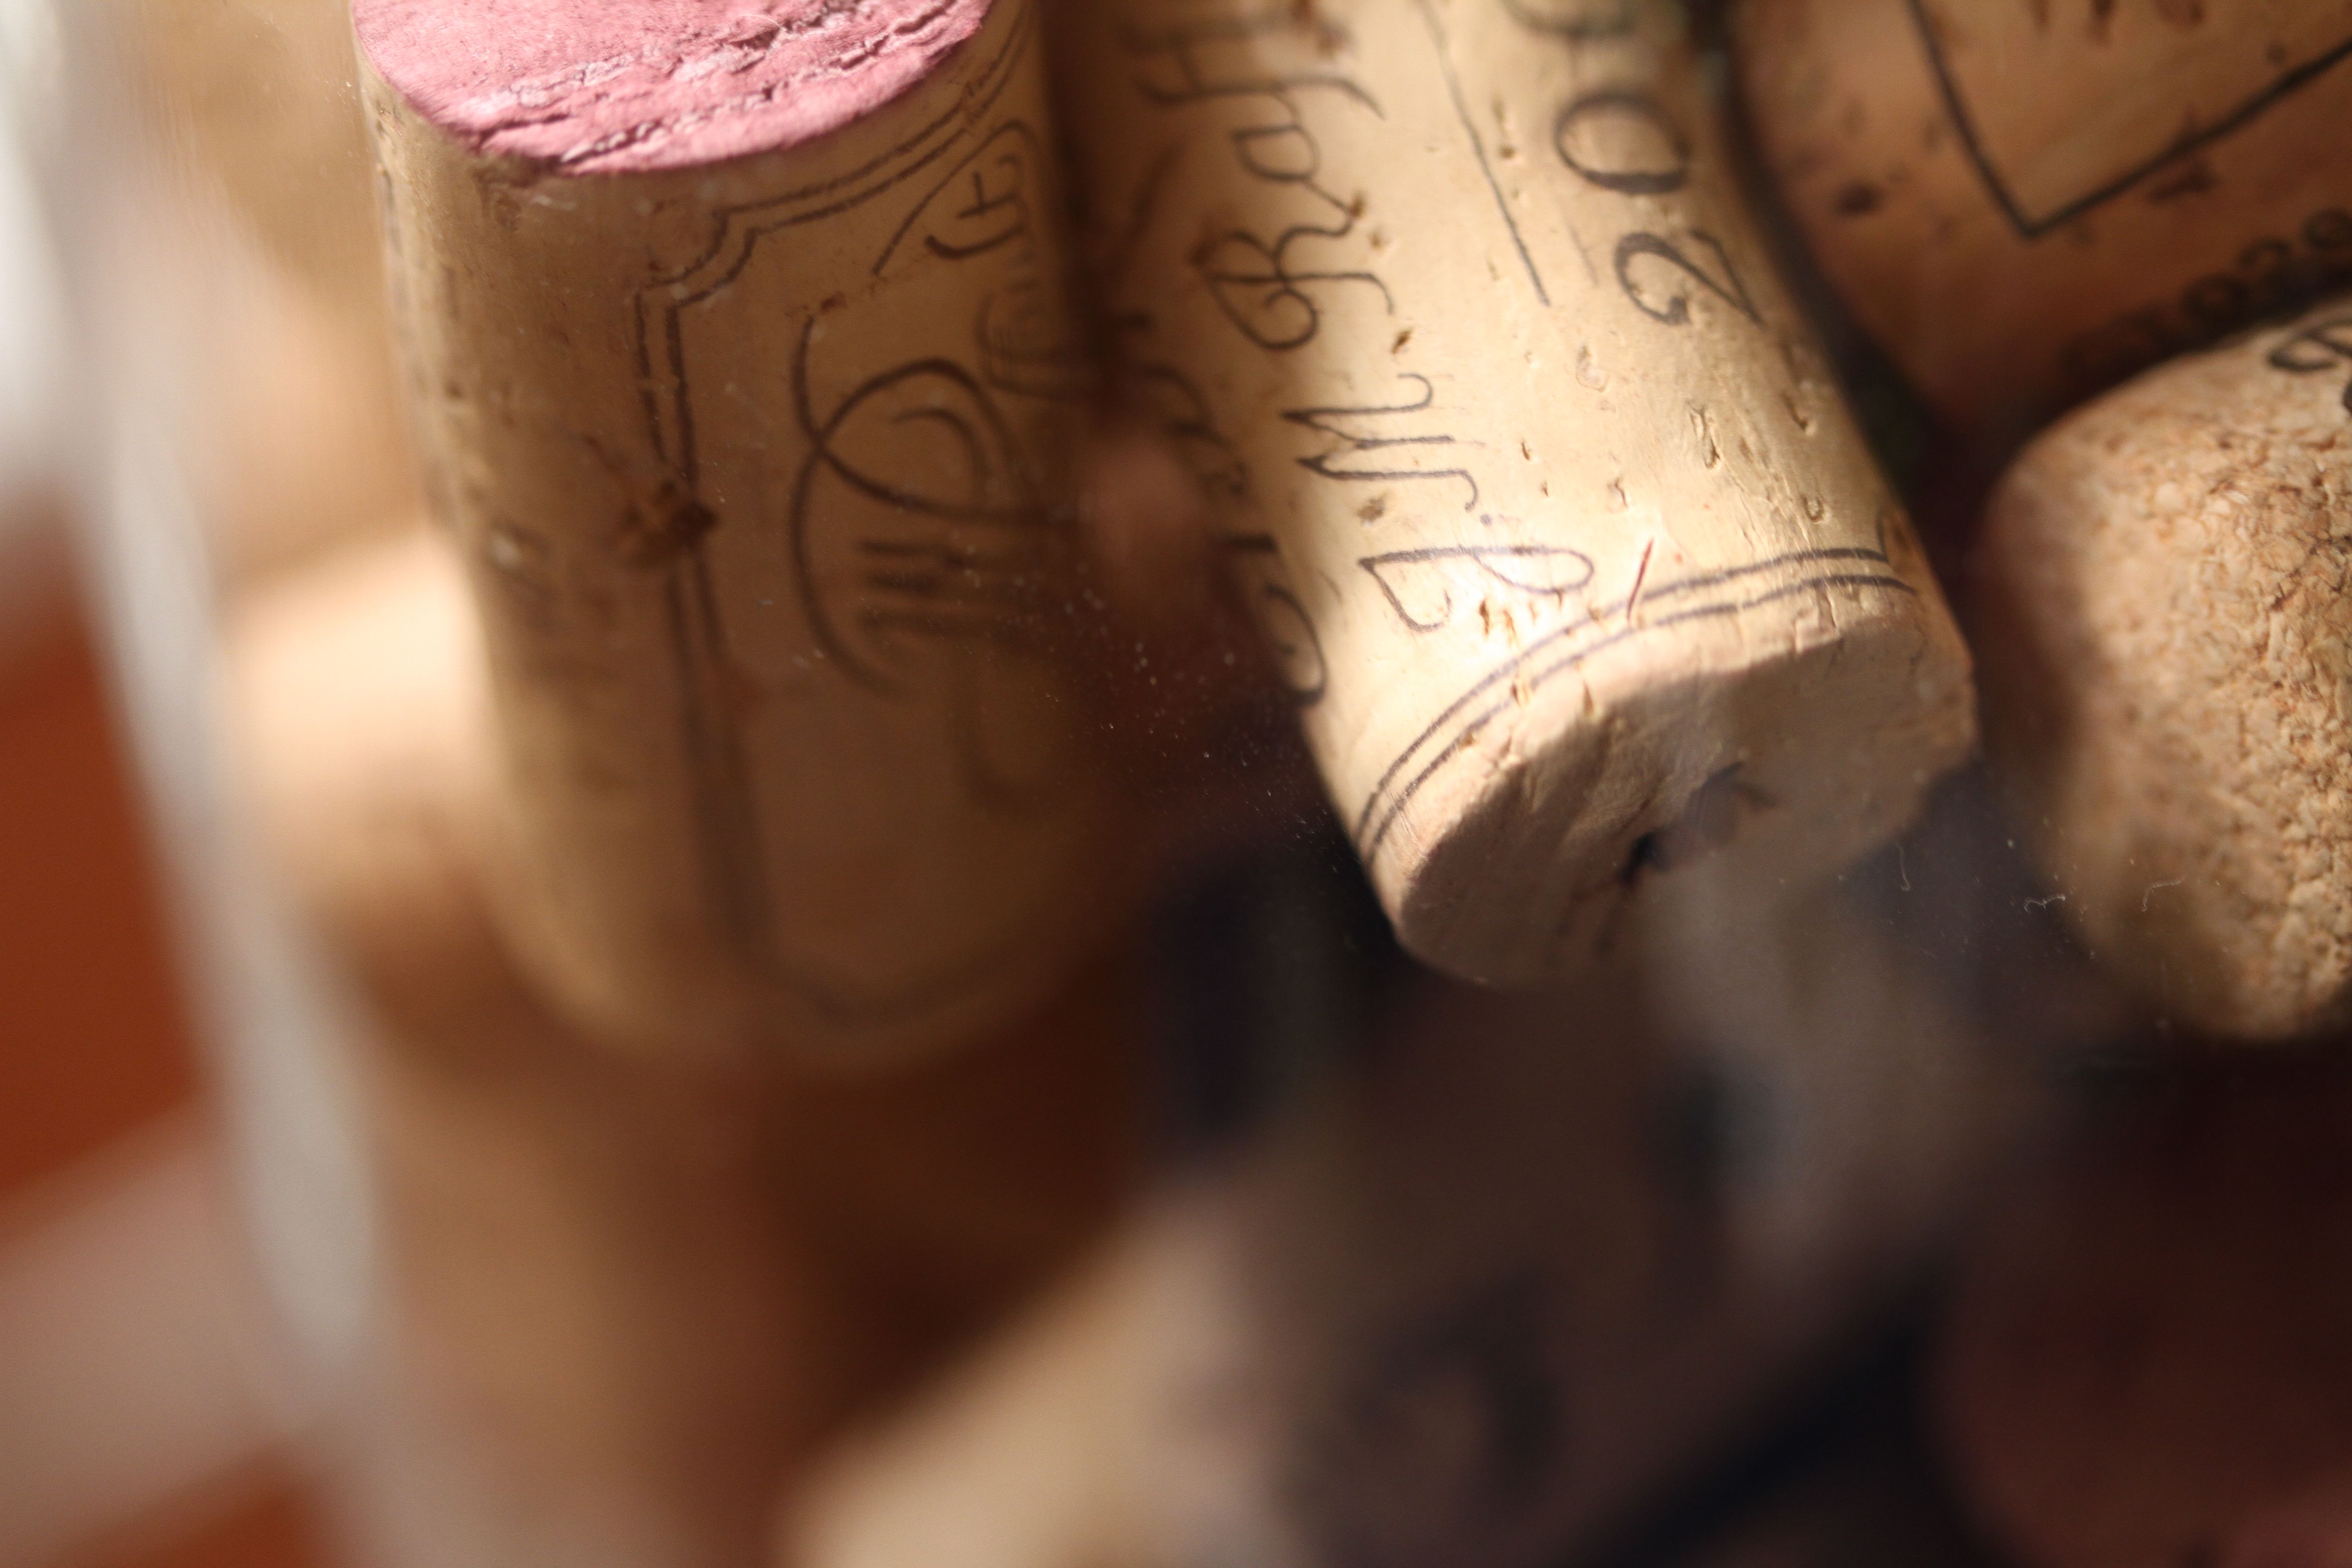 Beauty shot: corks, up close and personal. I wanted to add some blonde color, and some texture and these sentimental and innately beautiful corks seemed to fit the bill.